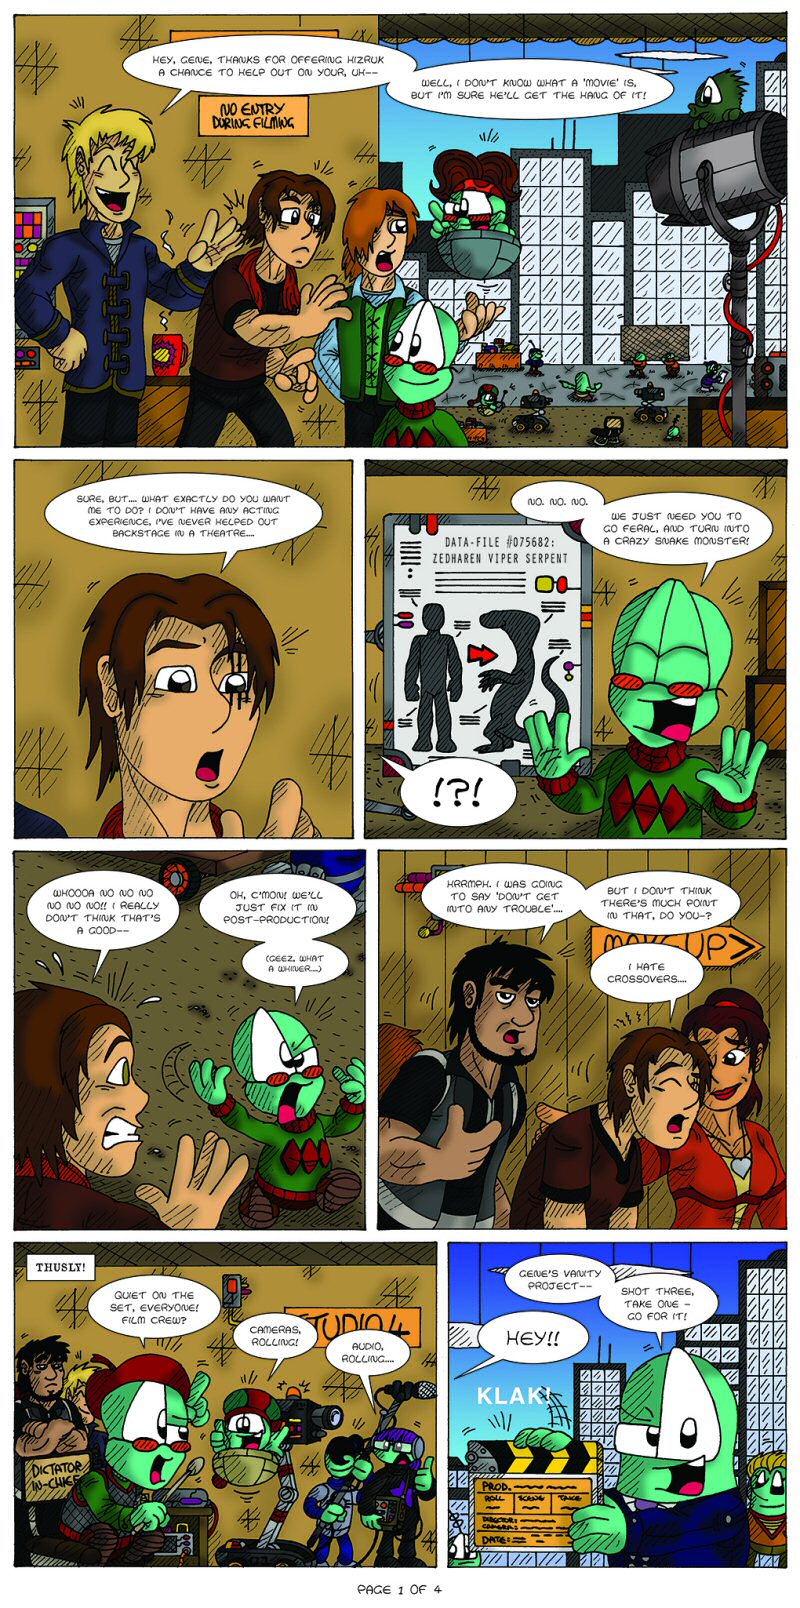 Serpents of Old Page 1 by  Cartoonist_at_Large